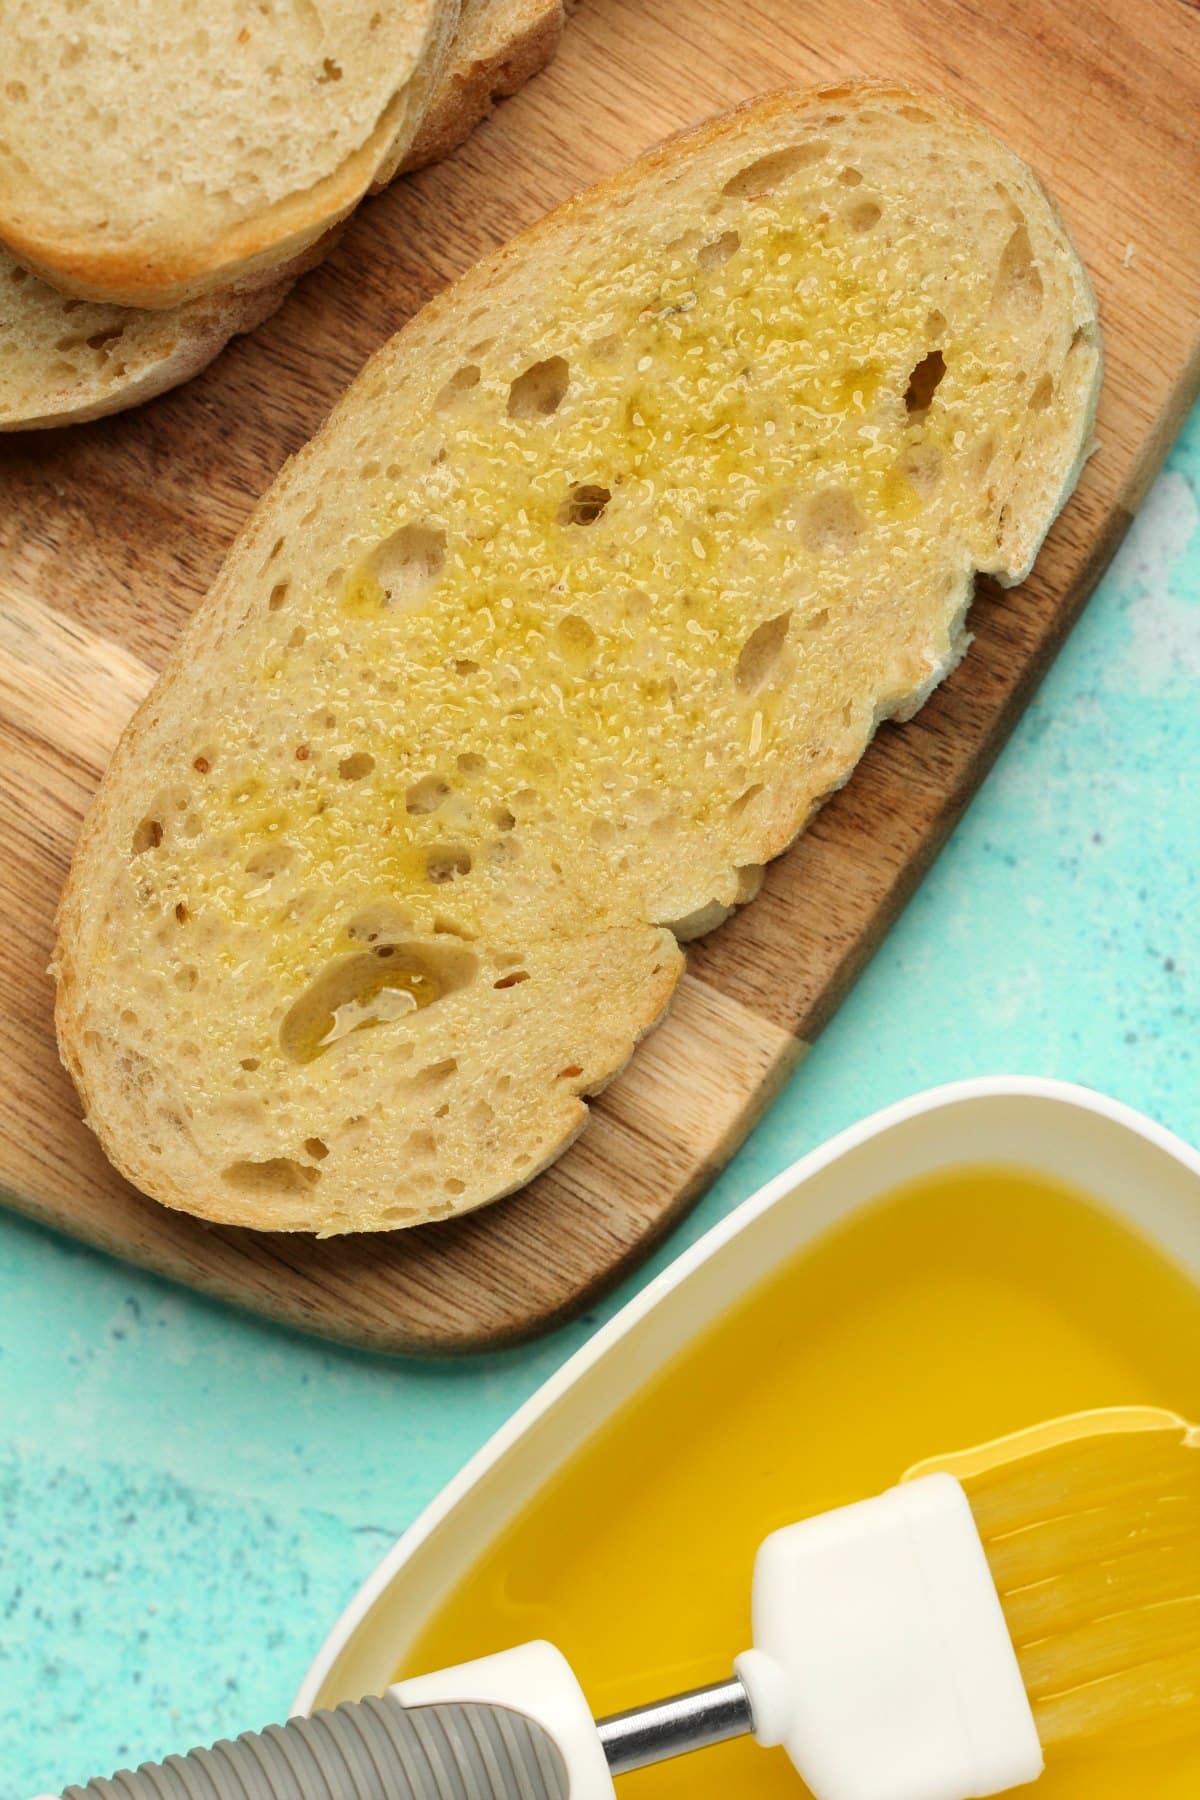 Brushing slices of ciabatta with olive oil. 